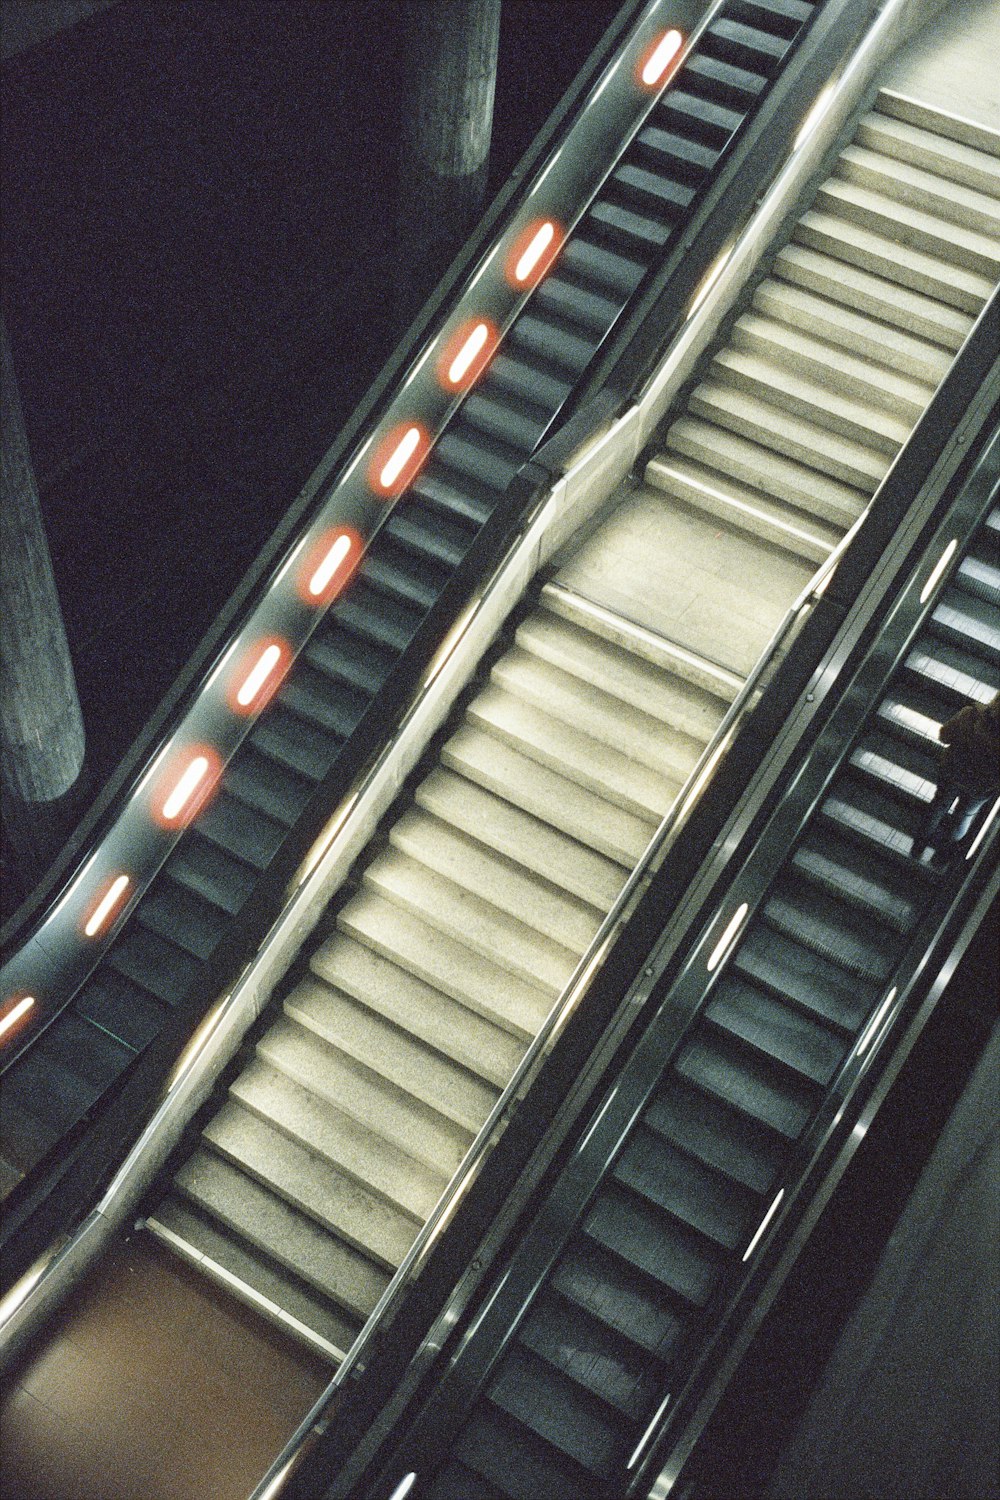 an escalator that has some lights on it